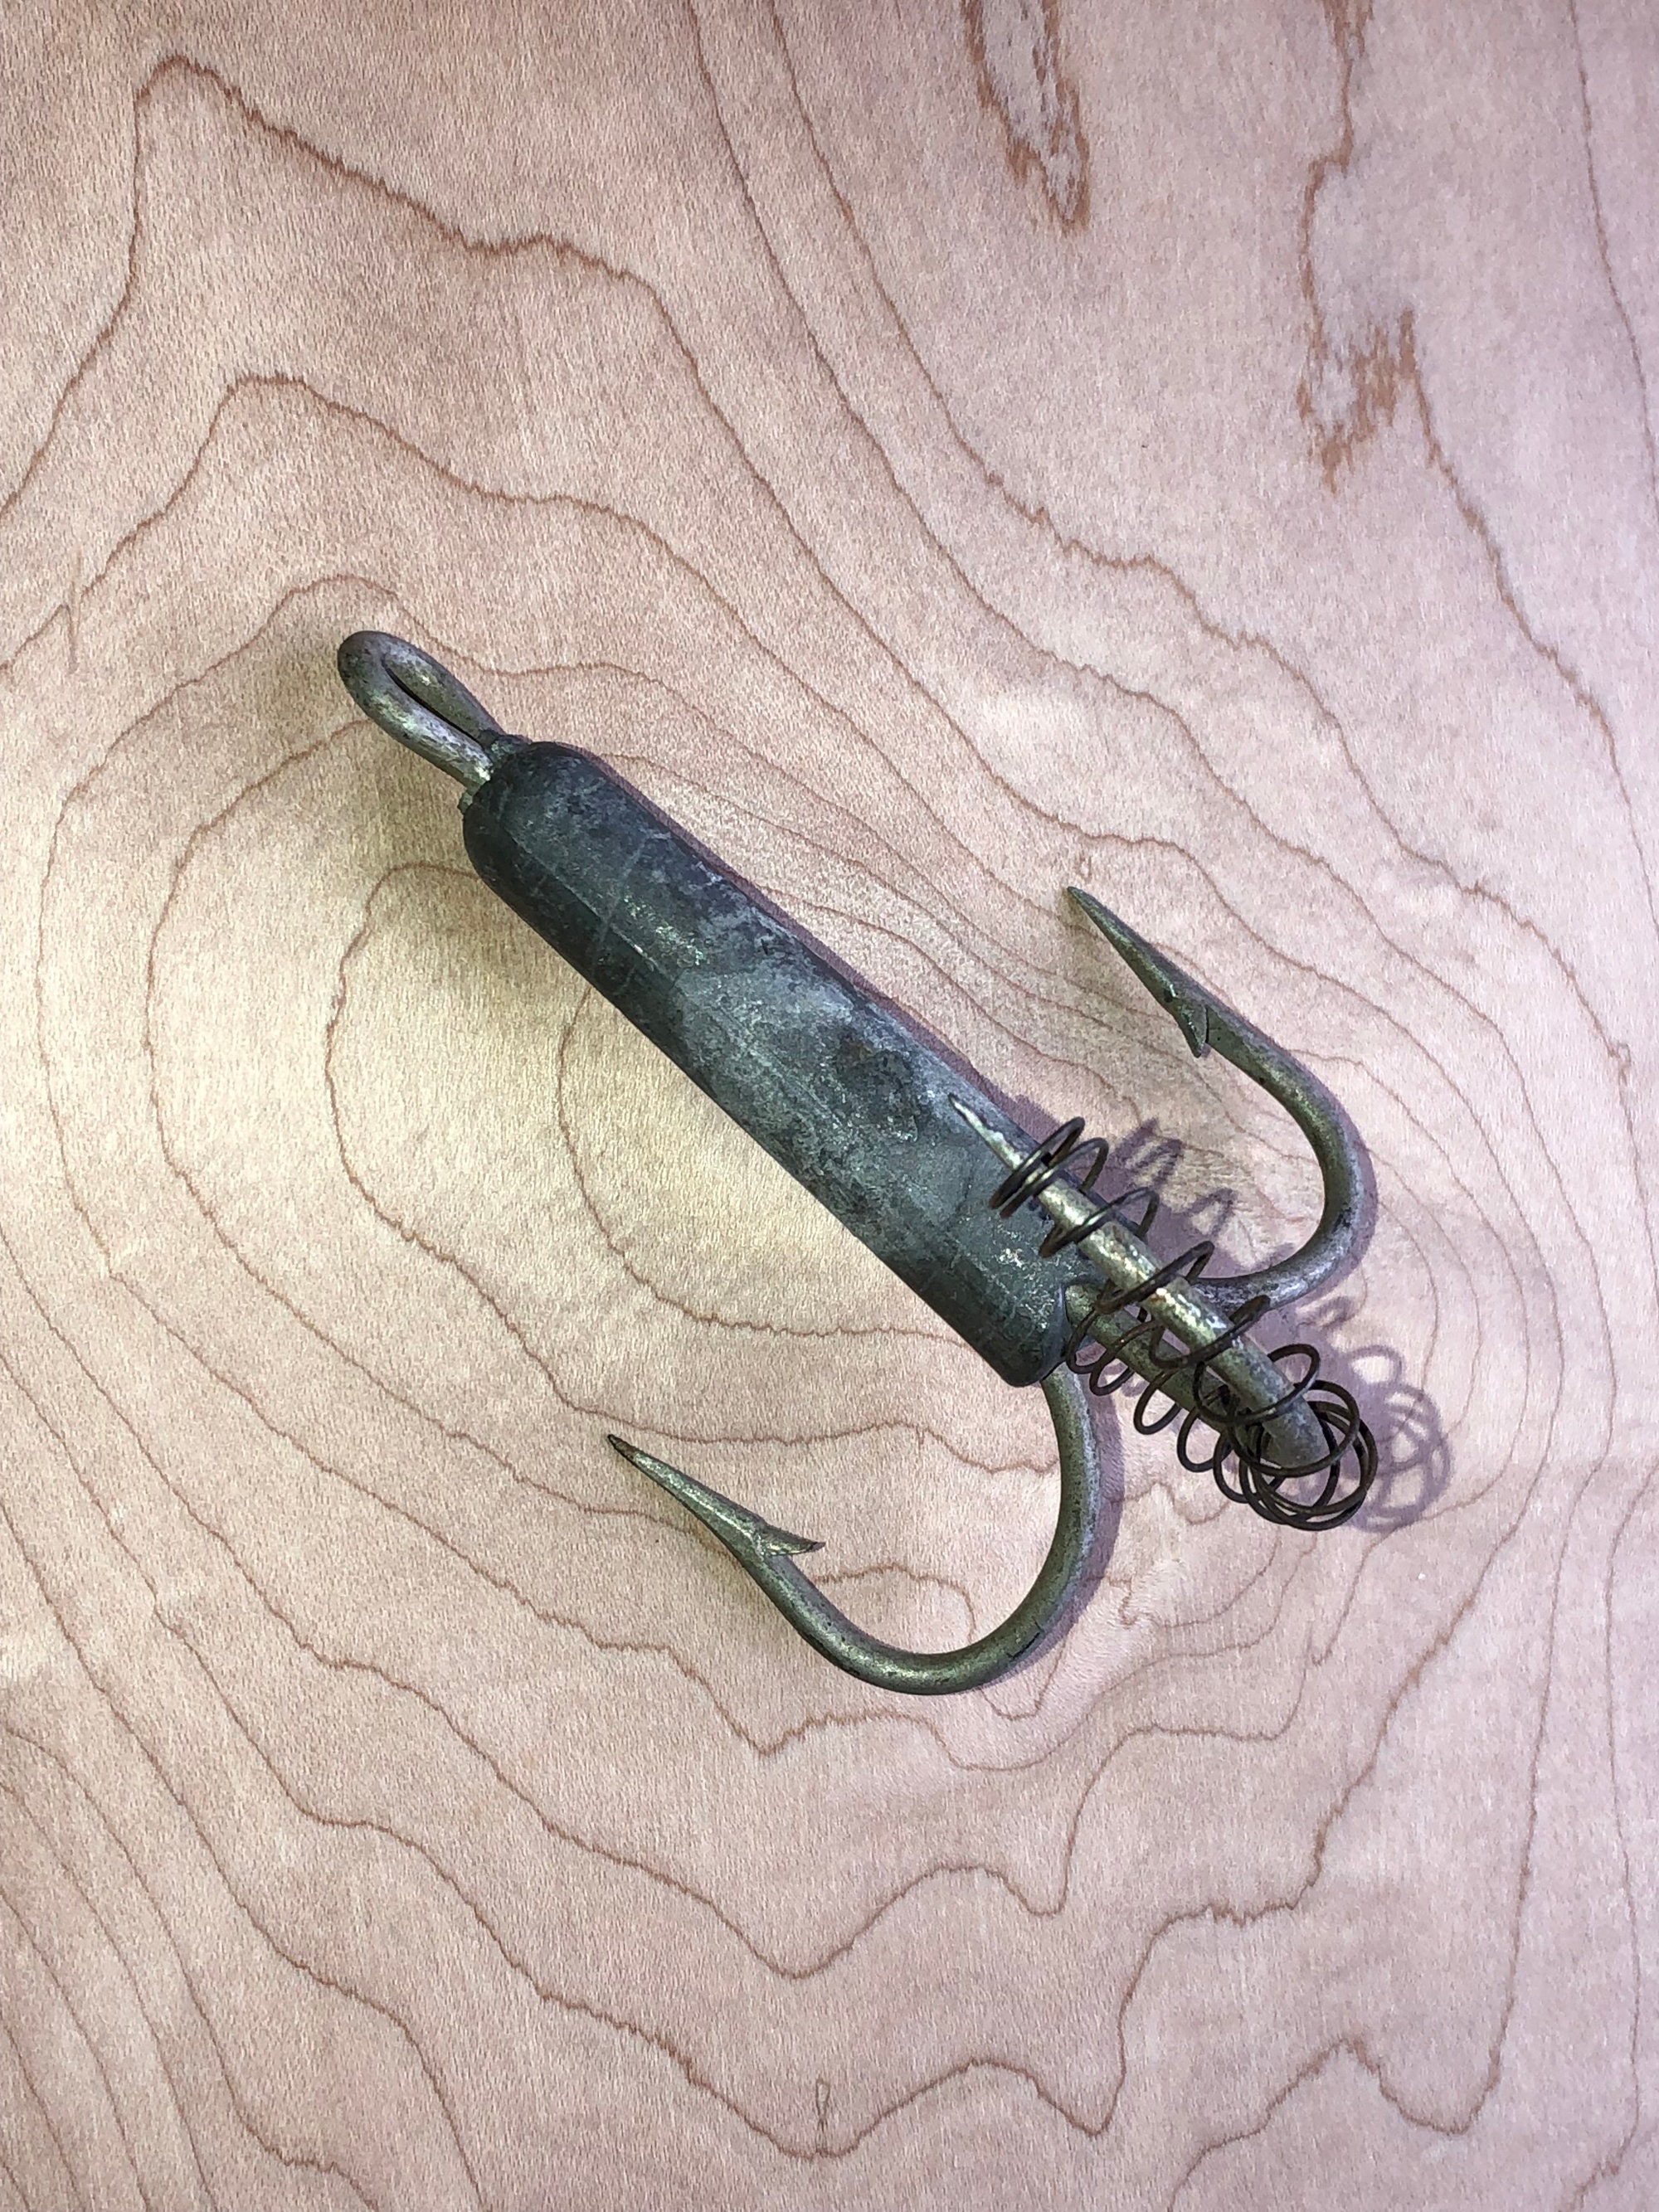 Antique Rare Treble Fishing Lead Weight All Handmade 3 Prong Large Size  Very Heavy Duty for That Large Fish 